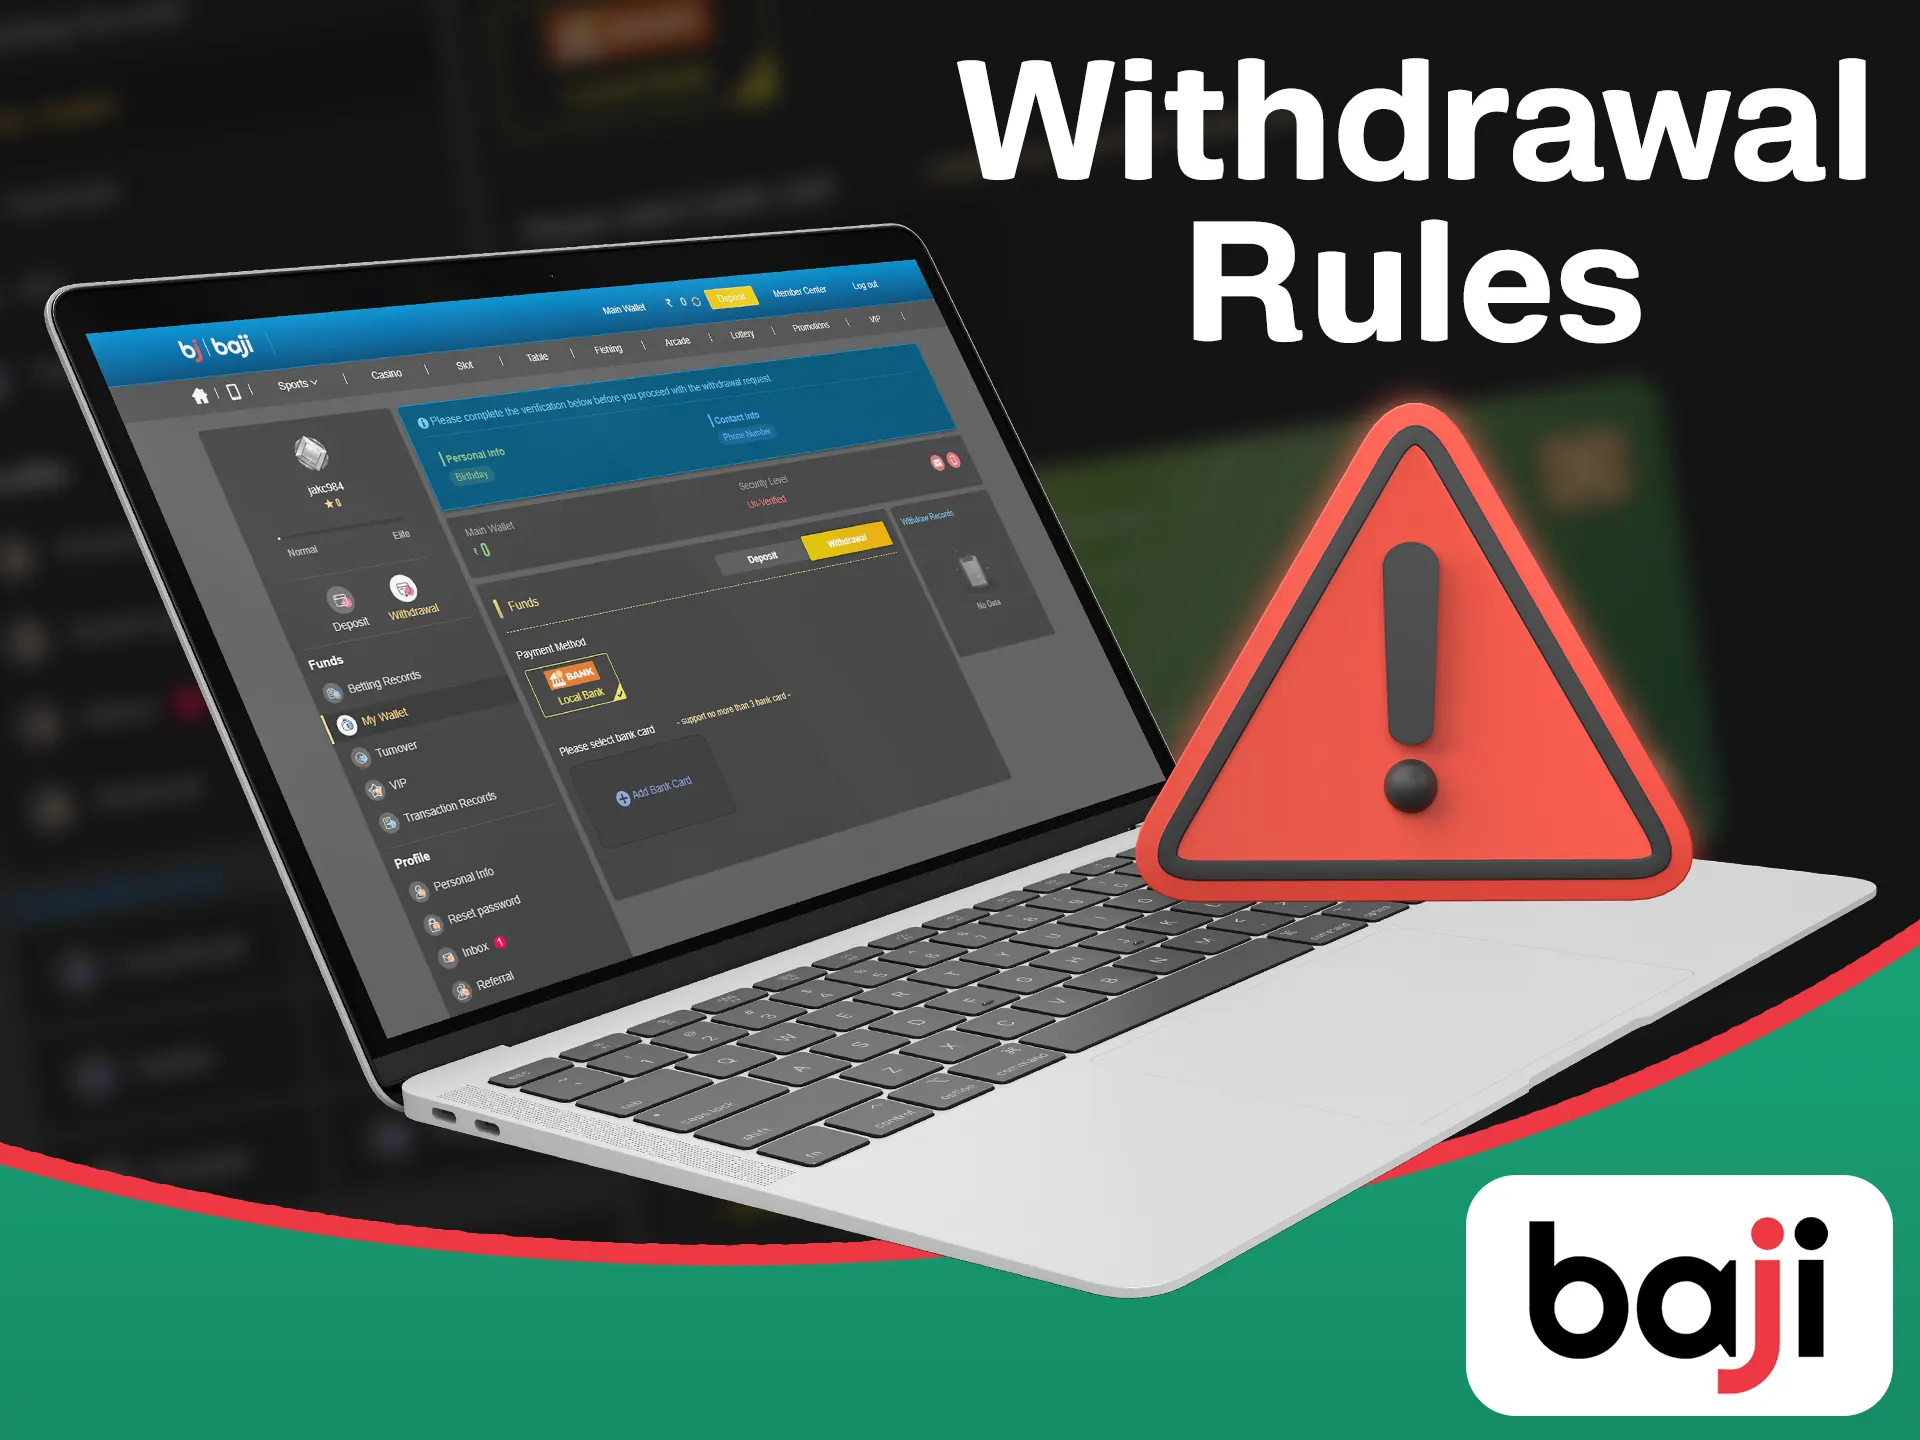 Follow Baji withdrawal rules when withdrawing your money.